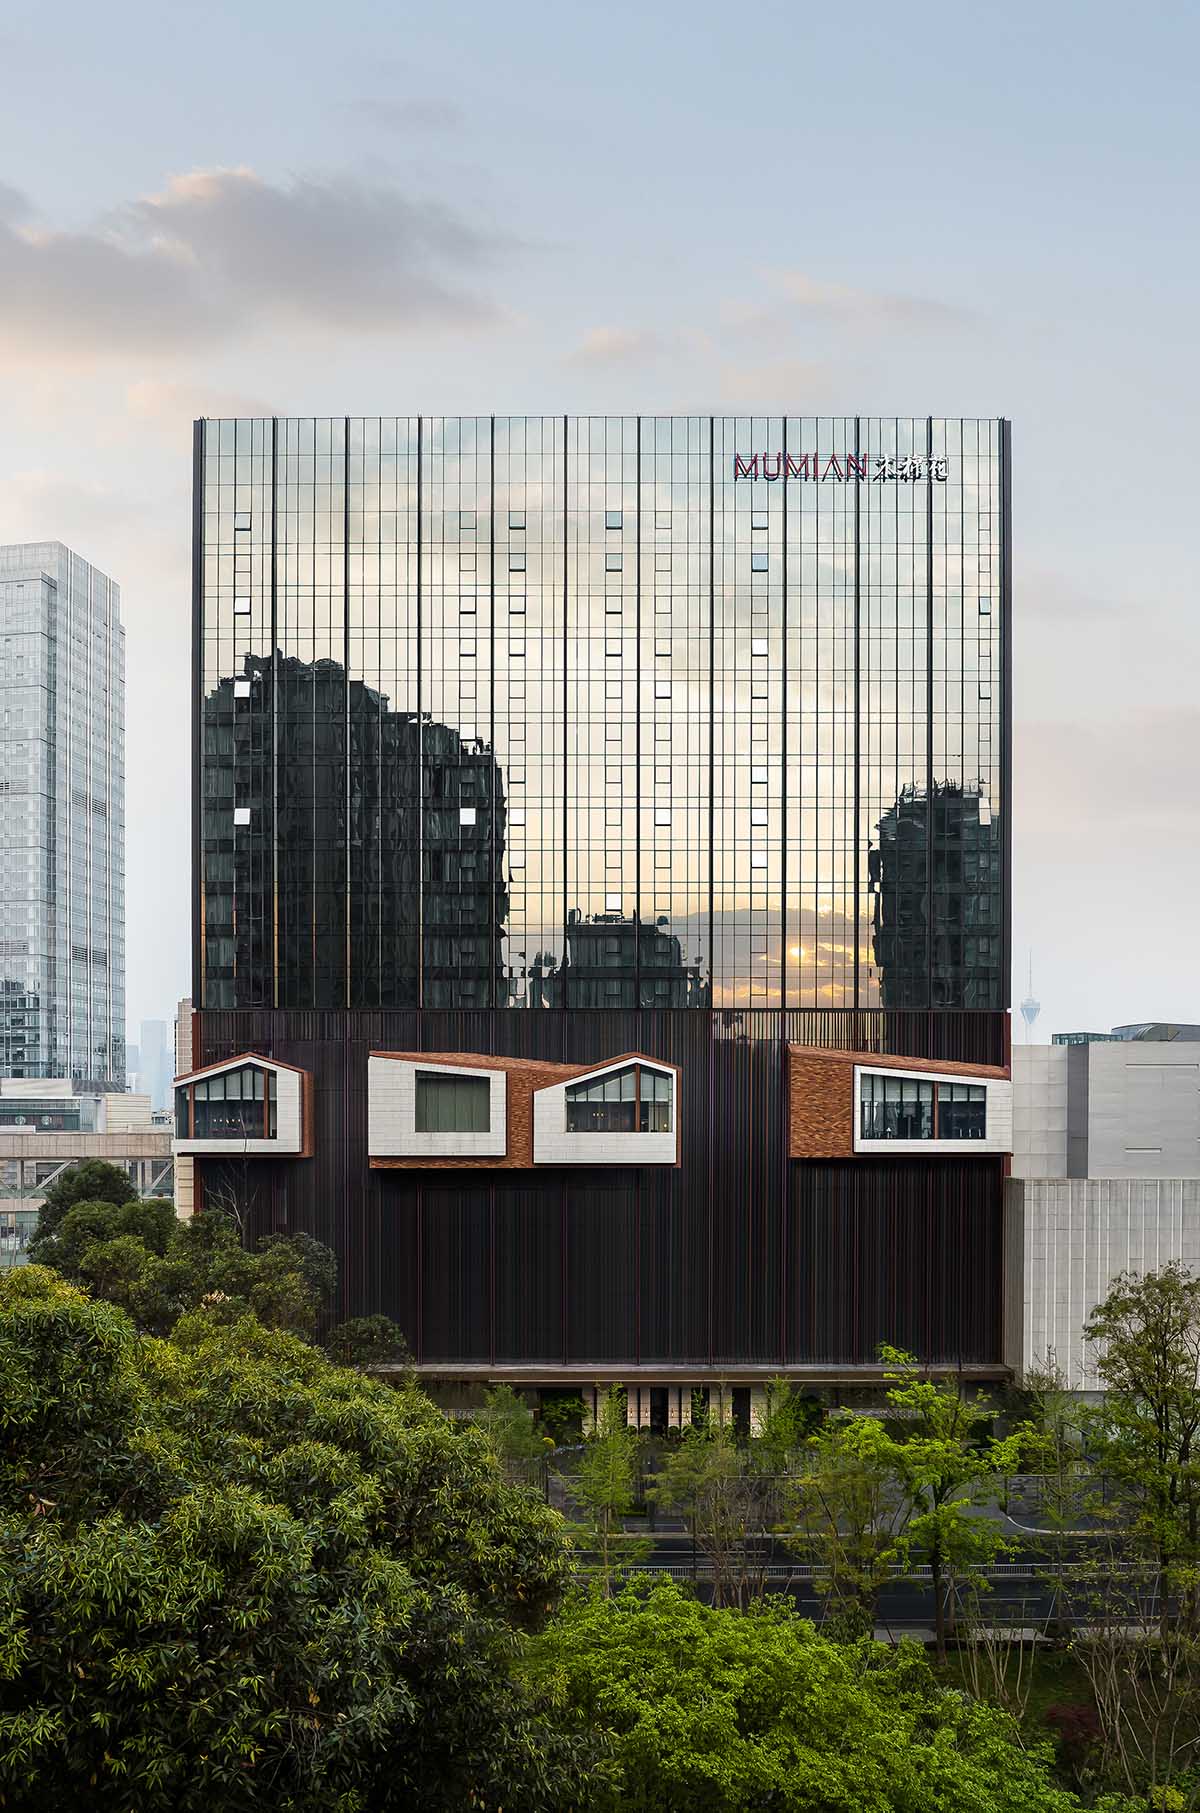 CCD creates interiors for Mumian Chengdu hotel with oriental architectural elements in China 